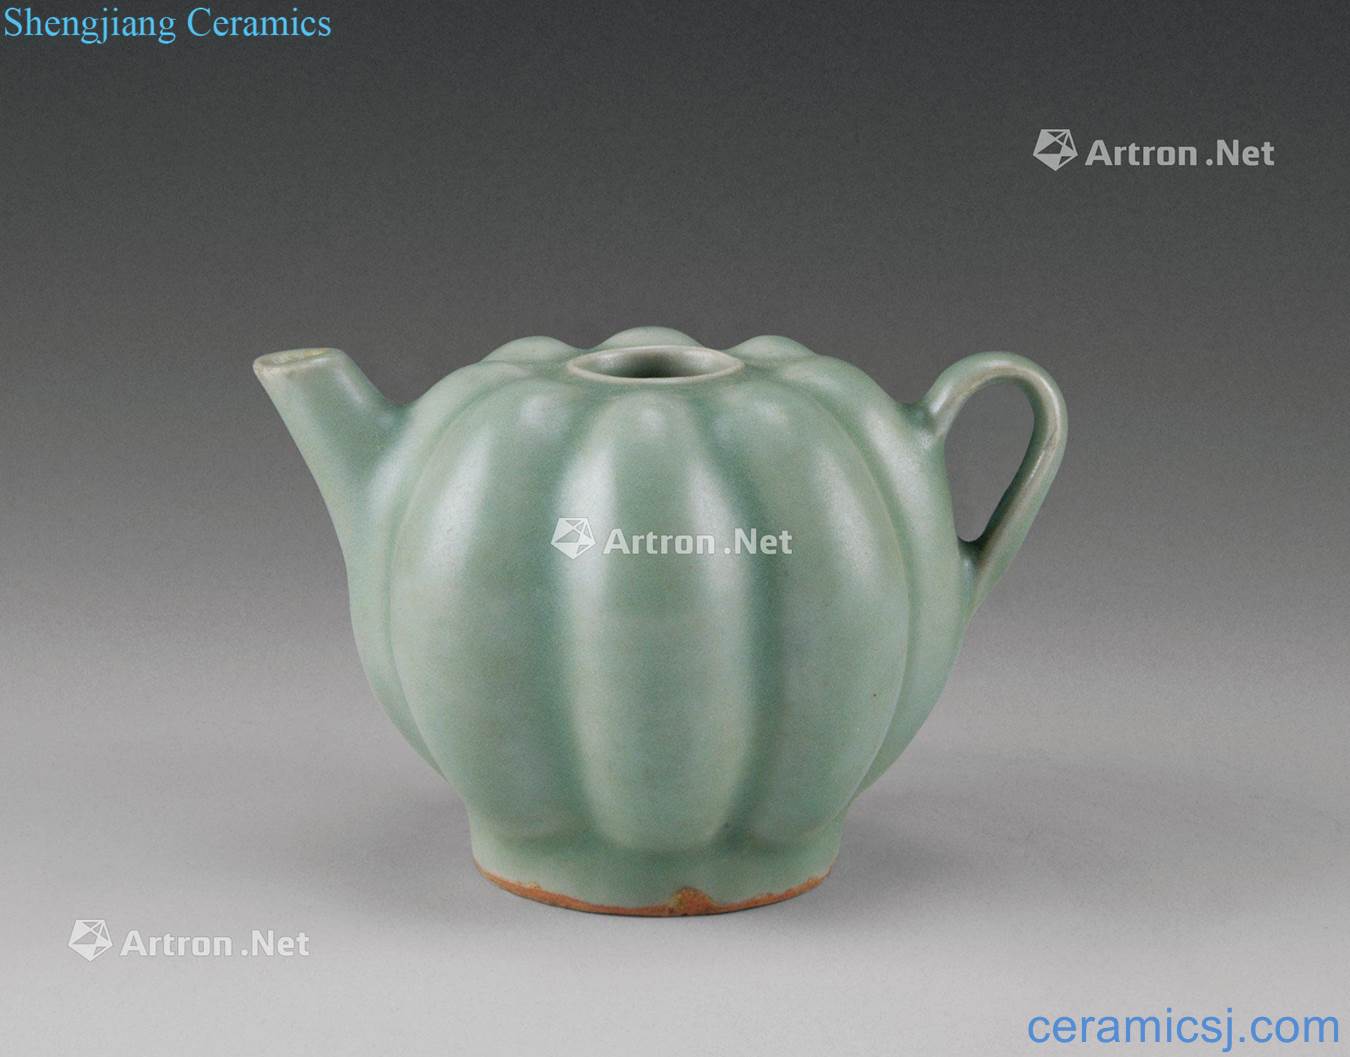 The southern song dynasty (1127-1279), longquan celadon melon prismatic ewer